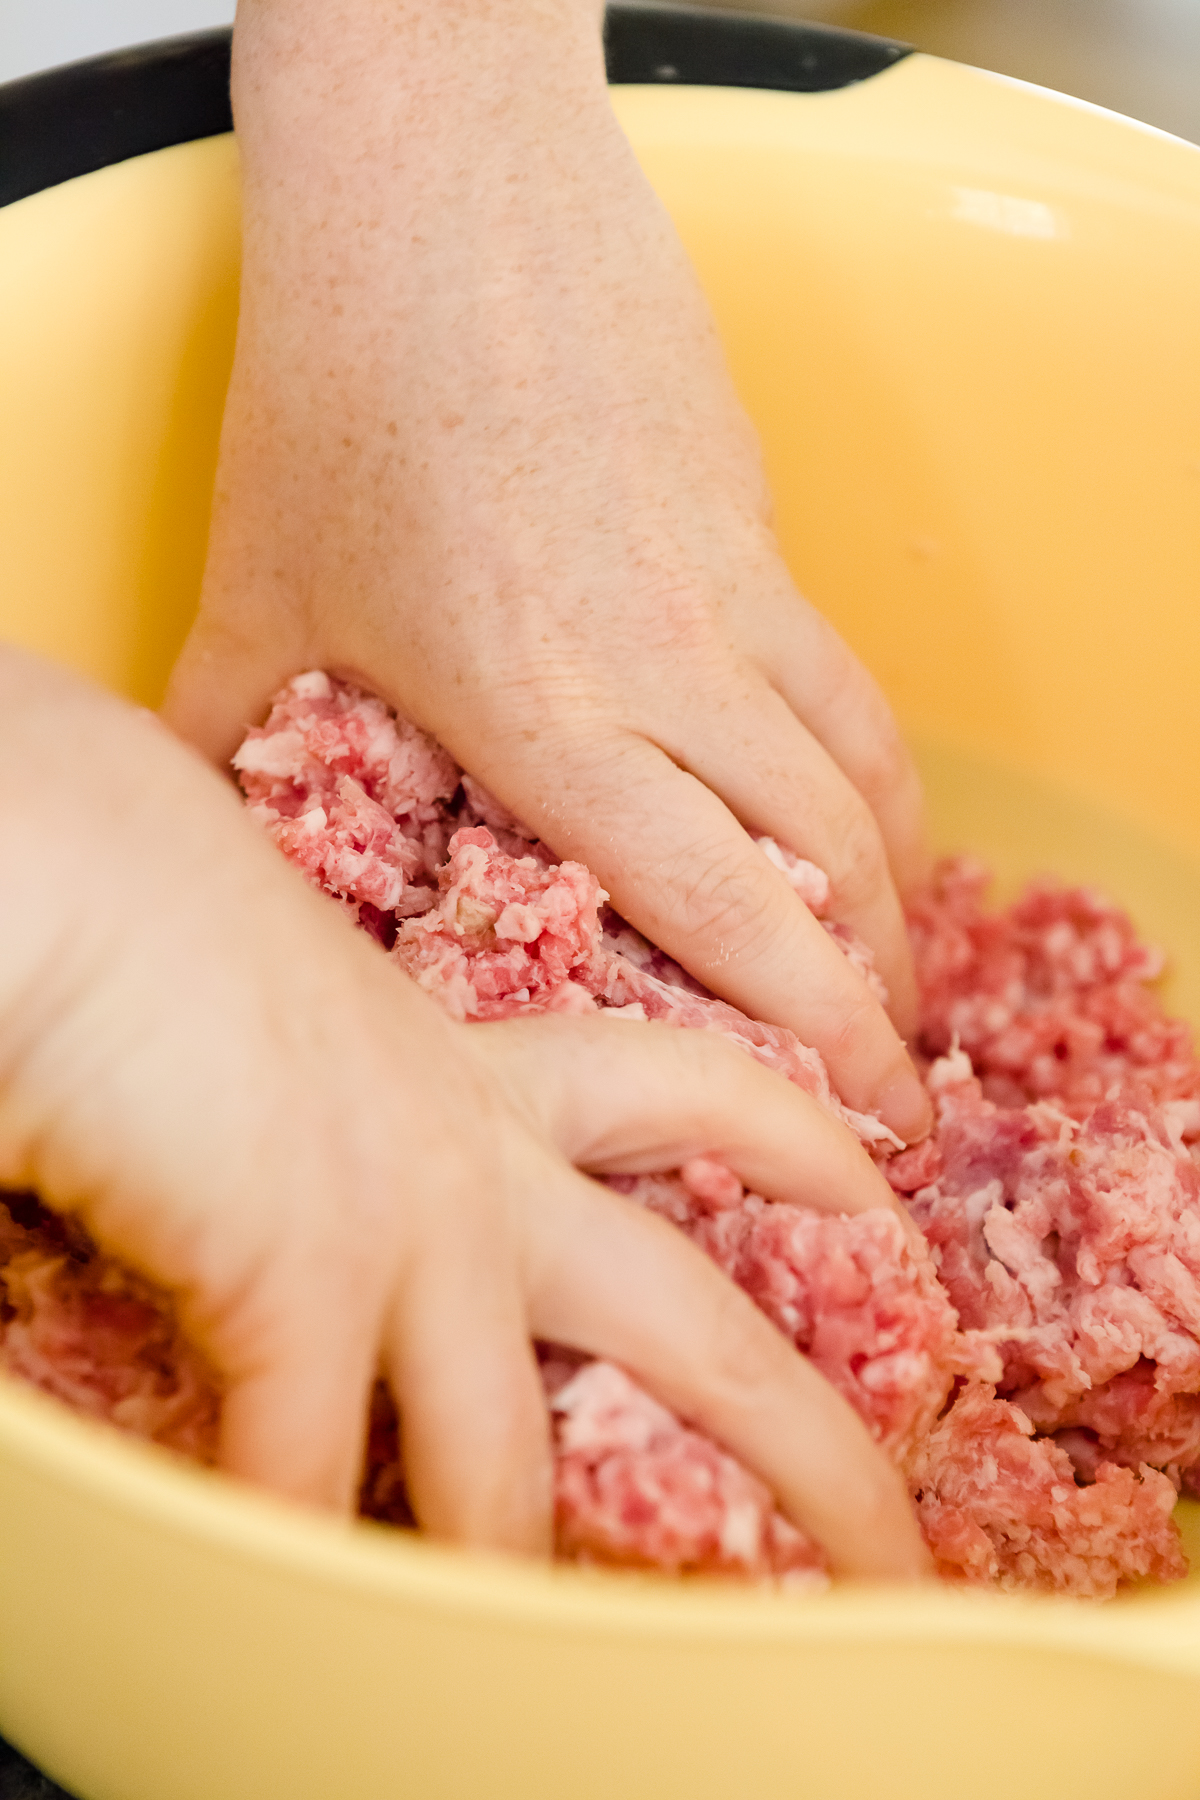 tight shot of Stef's hands mixing homemade Spam ingredients